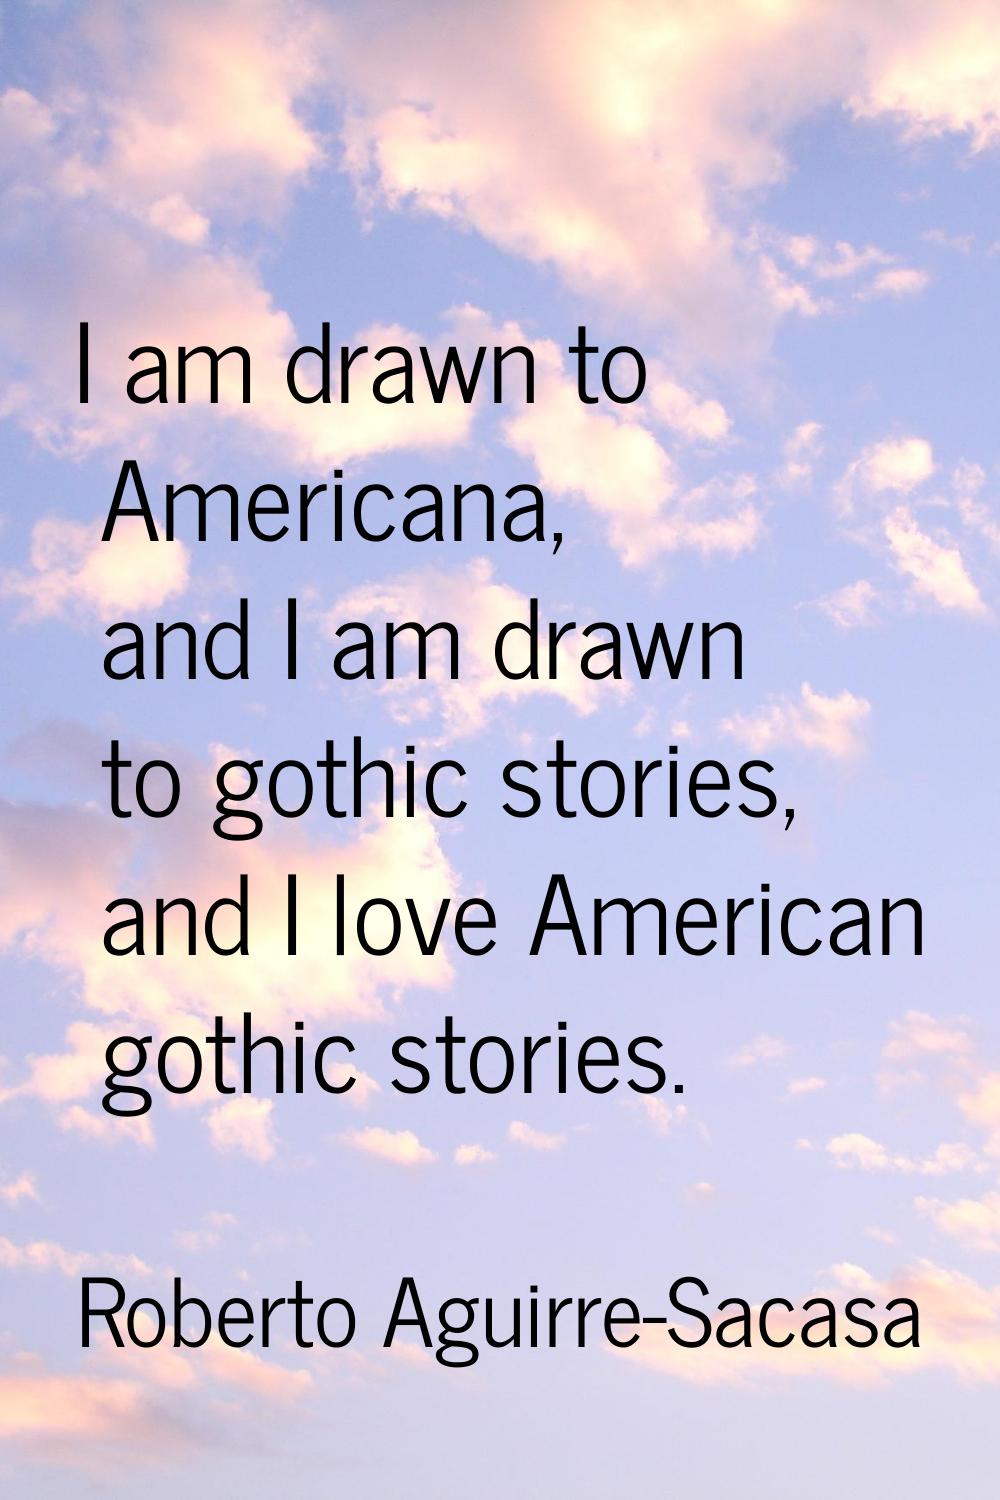 I am drawn to Americana, and I am drawn to gothic stories, and I love American gothic stories.